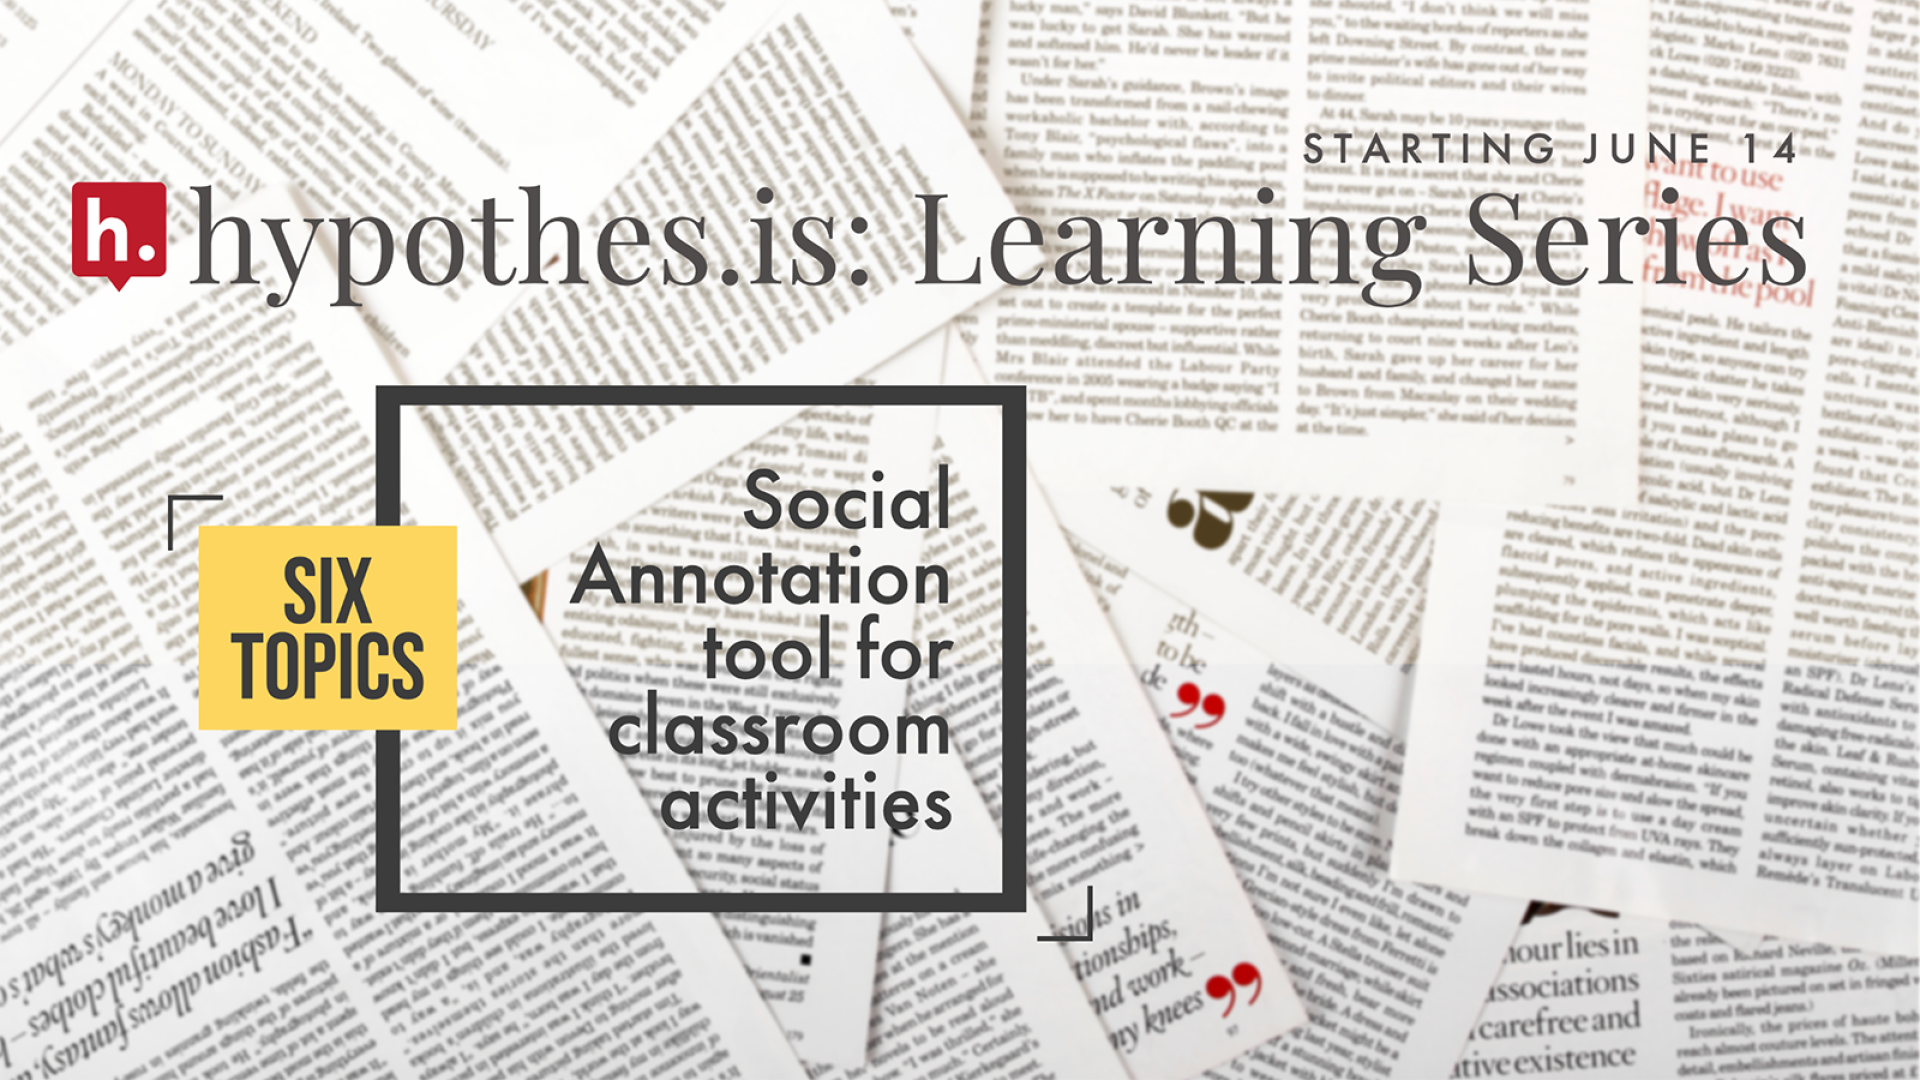  Six Topics Hypothesis Learning Series: Starts June 14 Social Annotation Tool for classroom activites